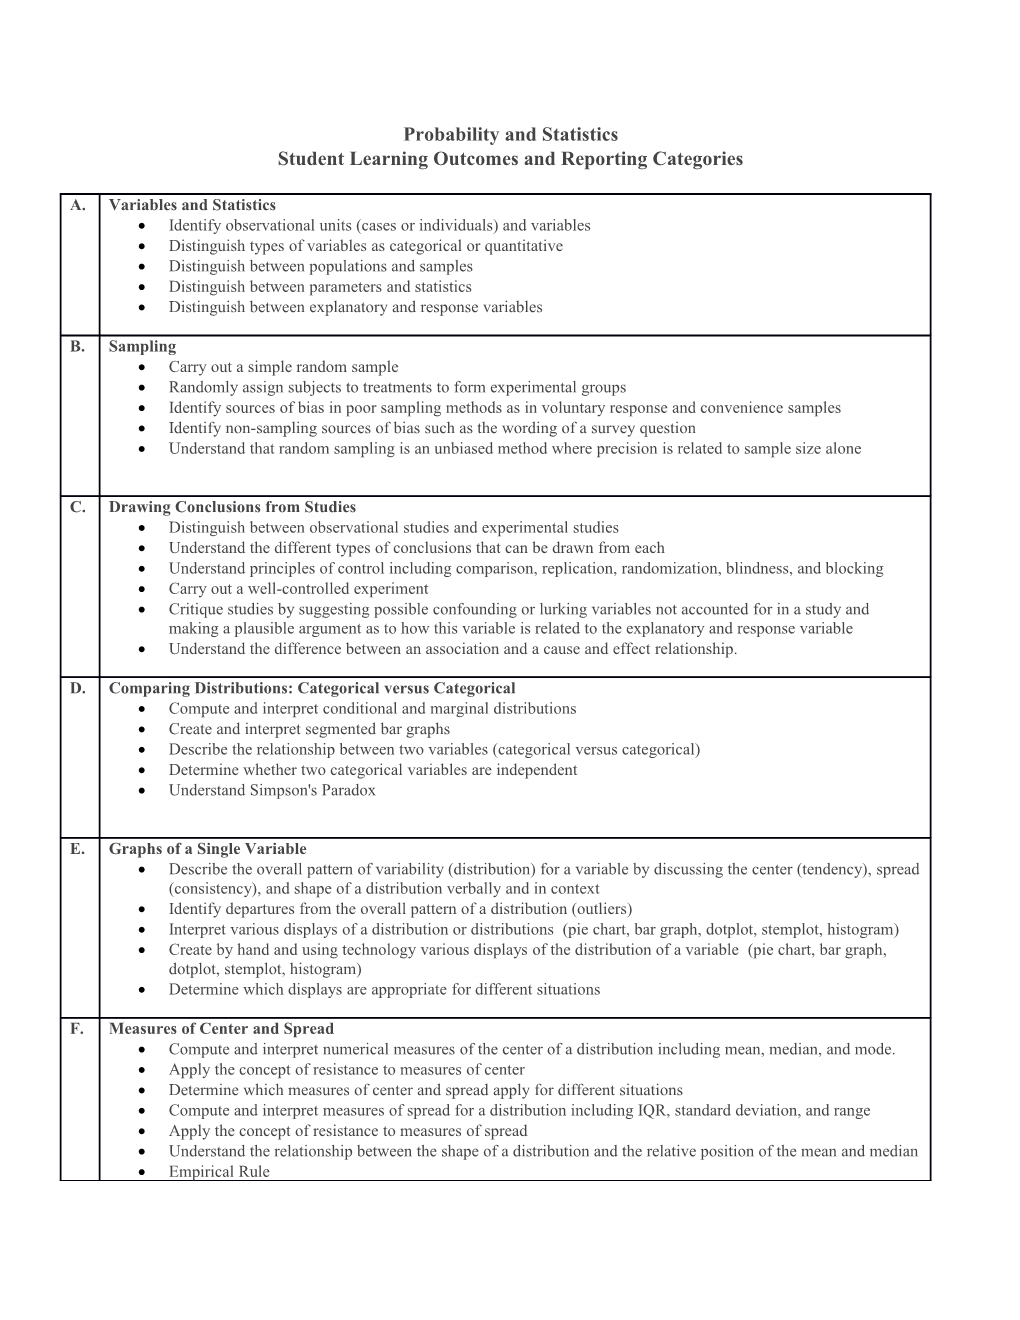 Student Learning Outcomes and Reporting Categories